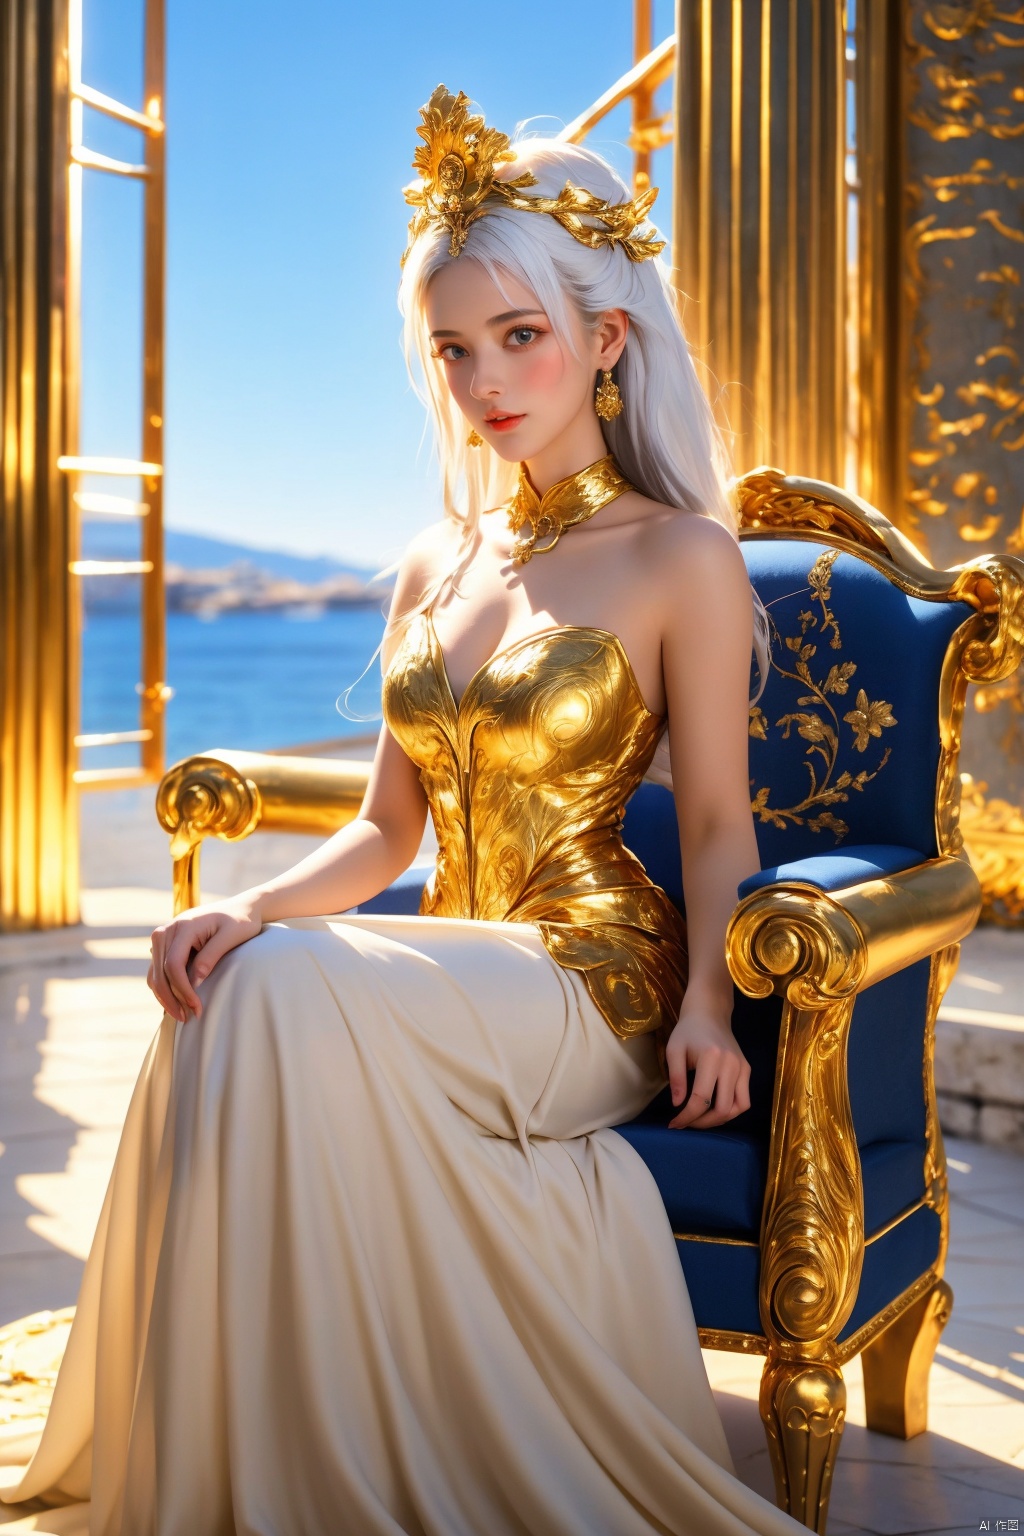 masterpiece, 1 girl, Look at me, Hera, White hair, Greek dress, Palace, Sitting on the throne, resplendent, Lots of roses, gilded, MYTHOS, Gold powder, Golden glow, textured skin, super detail, best quality, 16k, Blue sky outside the window, Ancient Greece